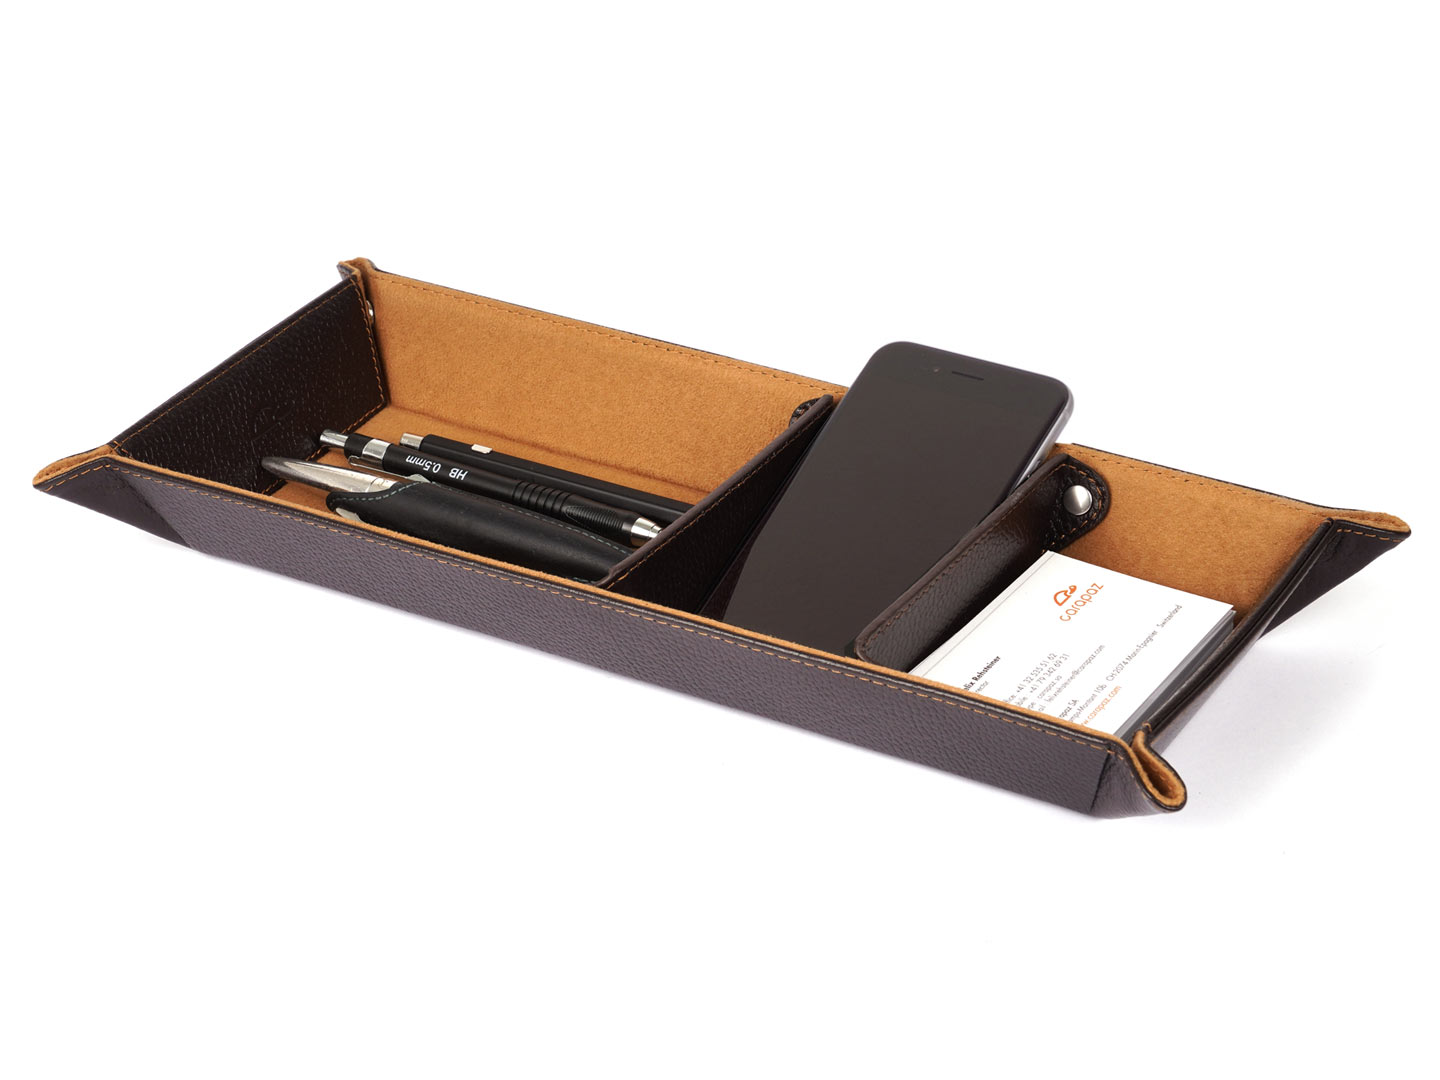 Desk Organizers and Design Catchall Leather Trays - Carapaz